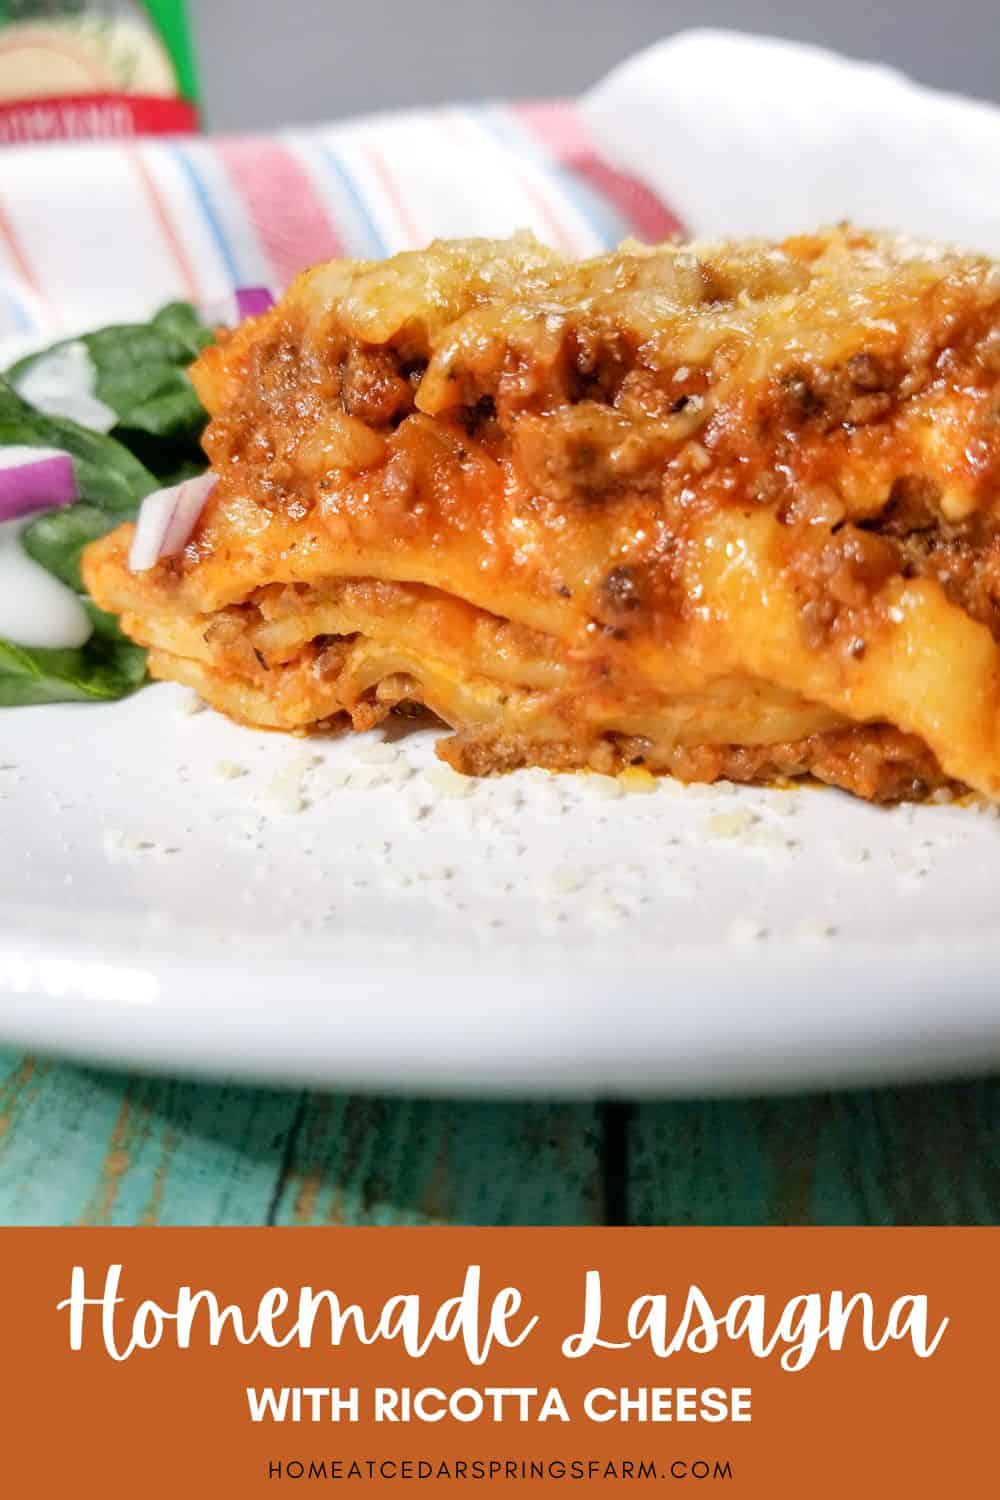 Easy Homemade Lasagna with Ricotta Cheese on a plate with a salad and text overlay.